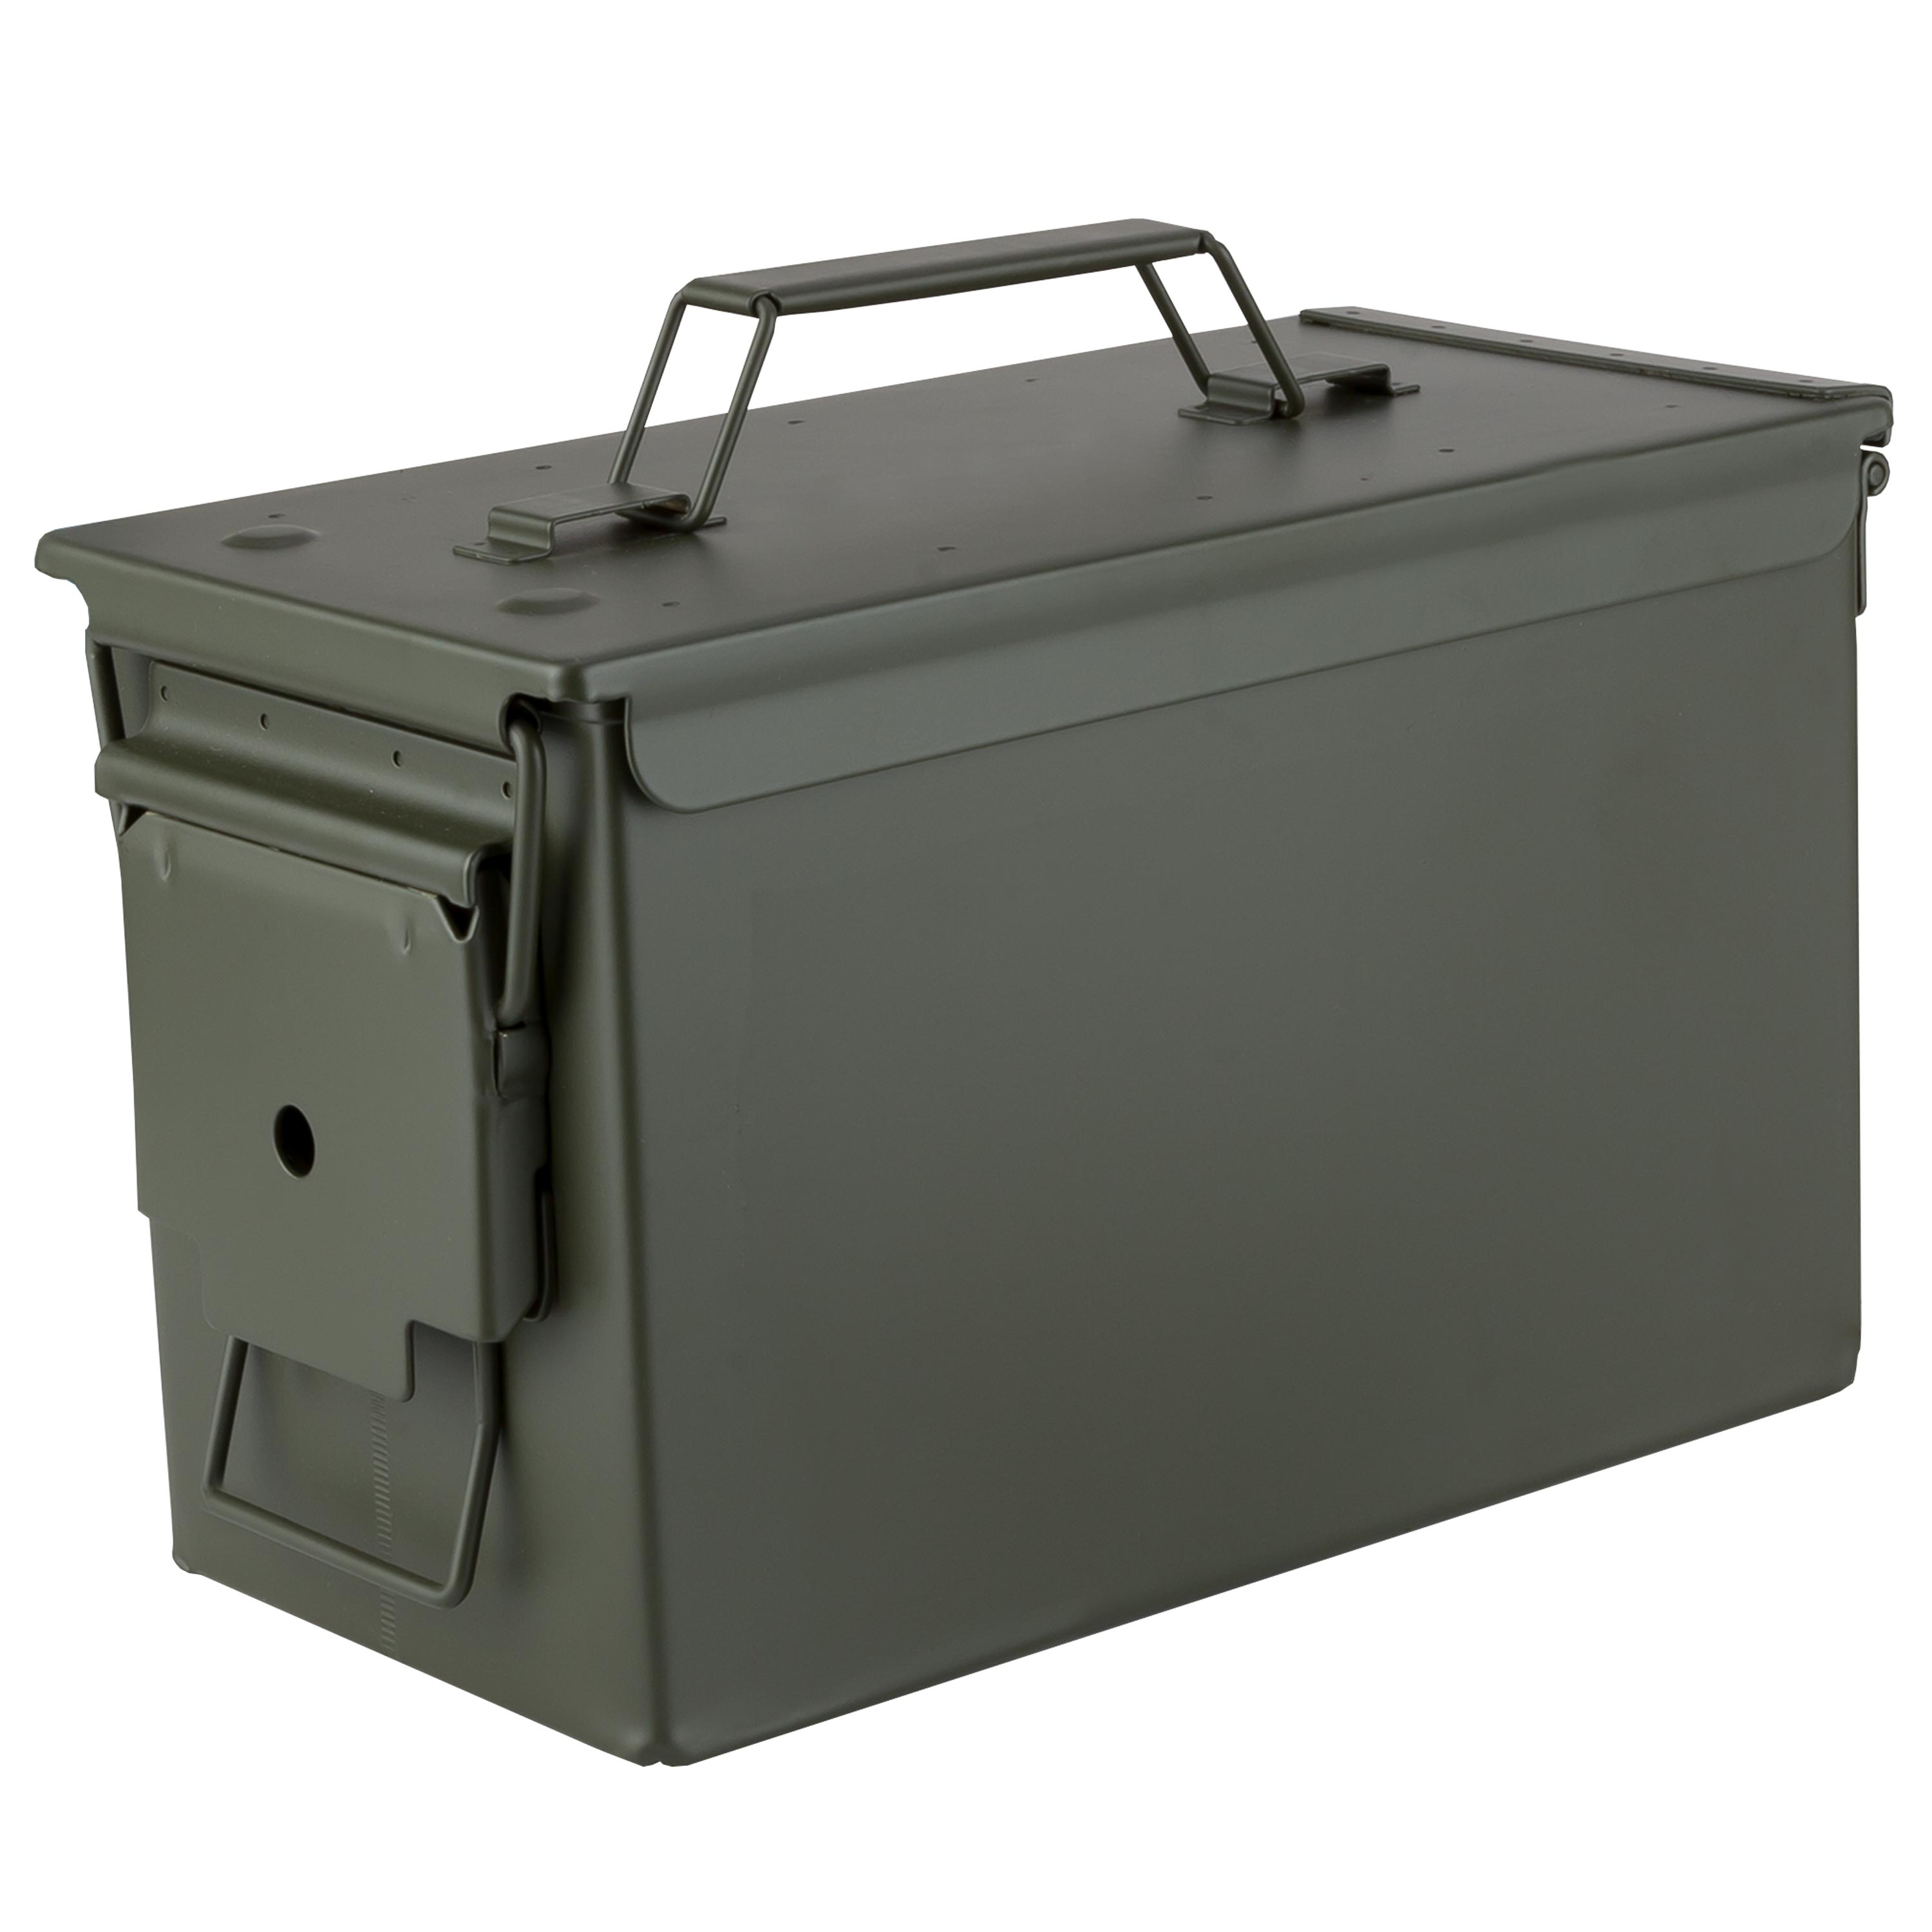 Paard verbanning infrastructuur Purchase the Metal Ammunition Box US 50 Caliber olive by ASMC